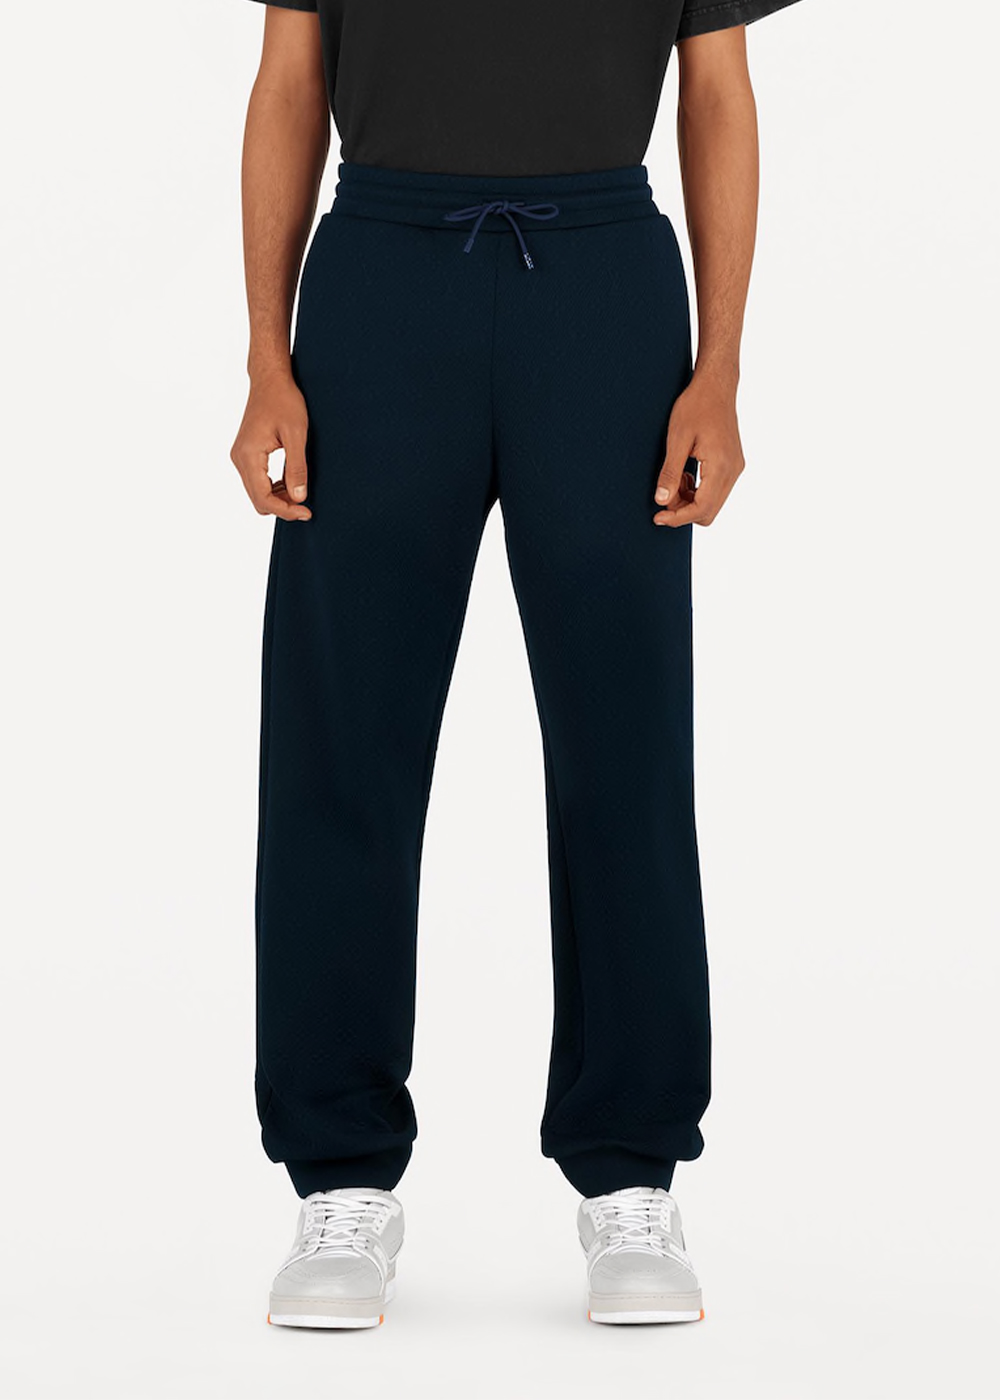 10 Cozy Sweatpants You'll Still Want When This Is Done - Sharp